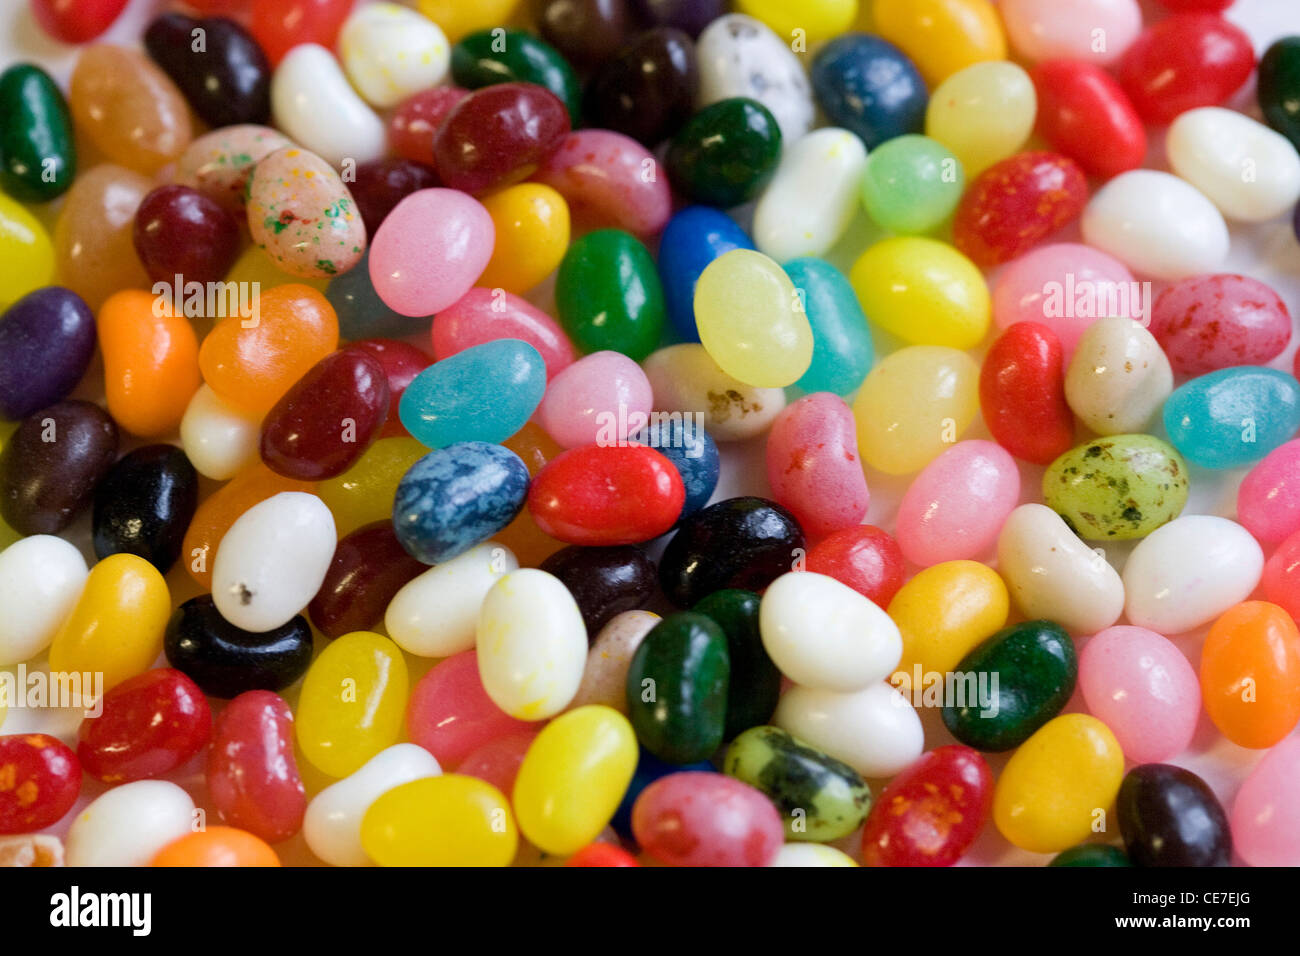 Flavored jelly beans. Stock Photo